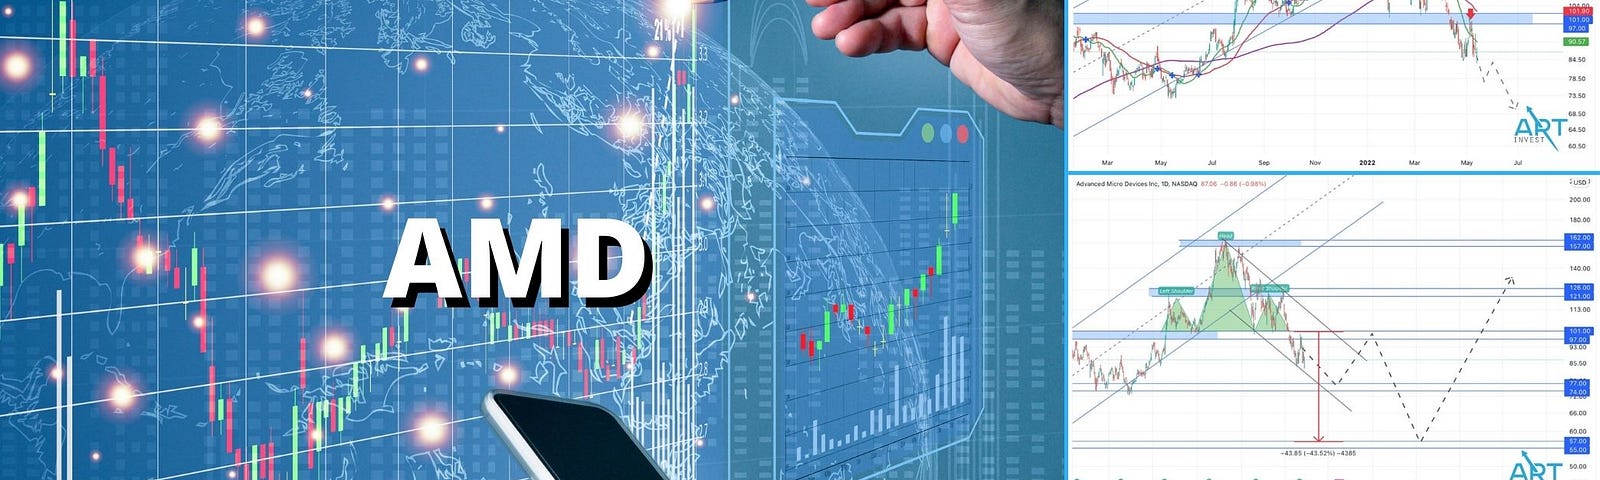 3 things to read on AMD chart